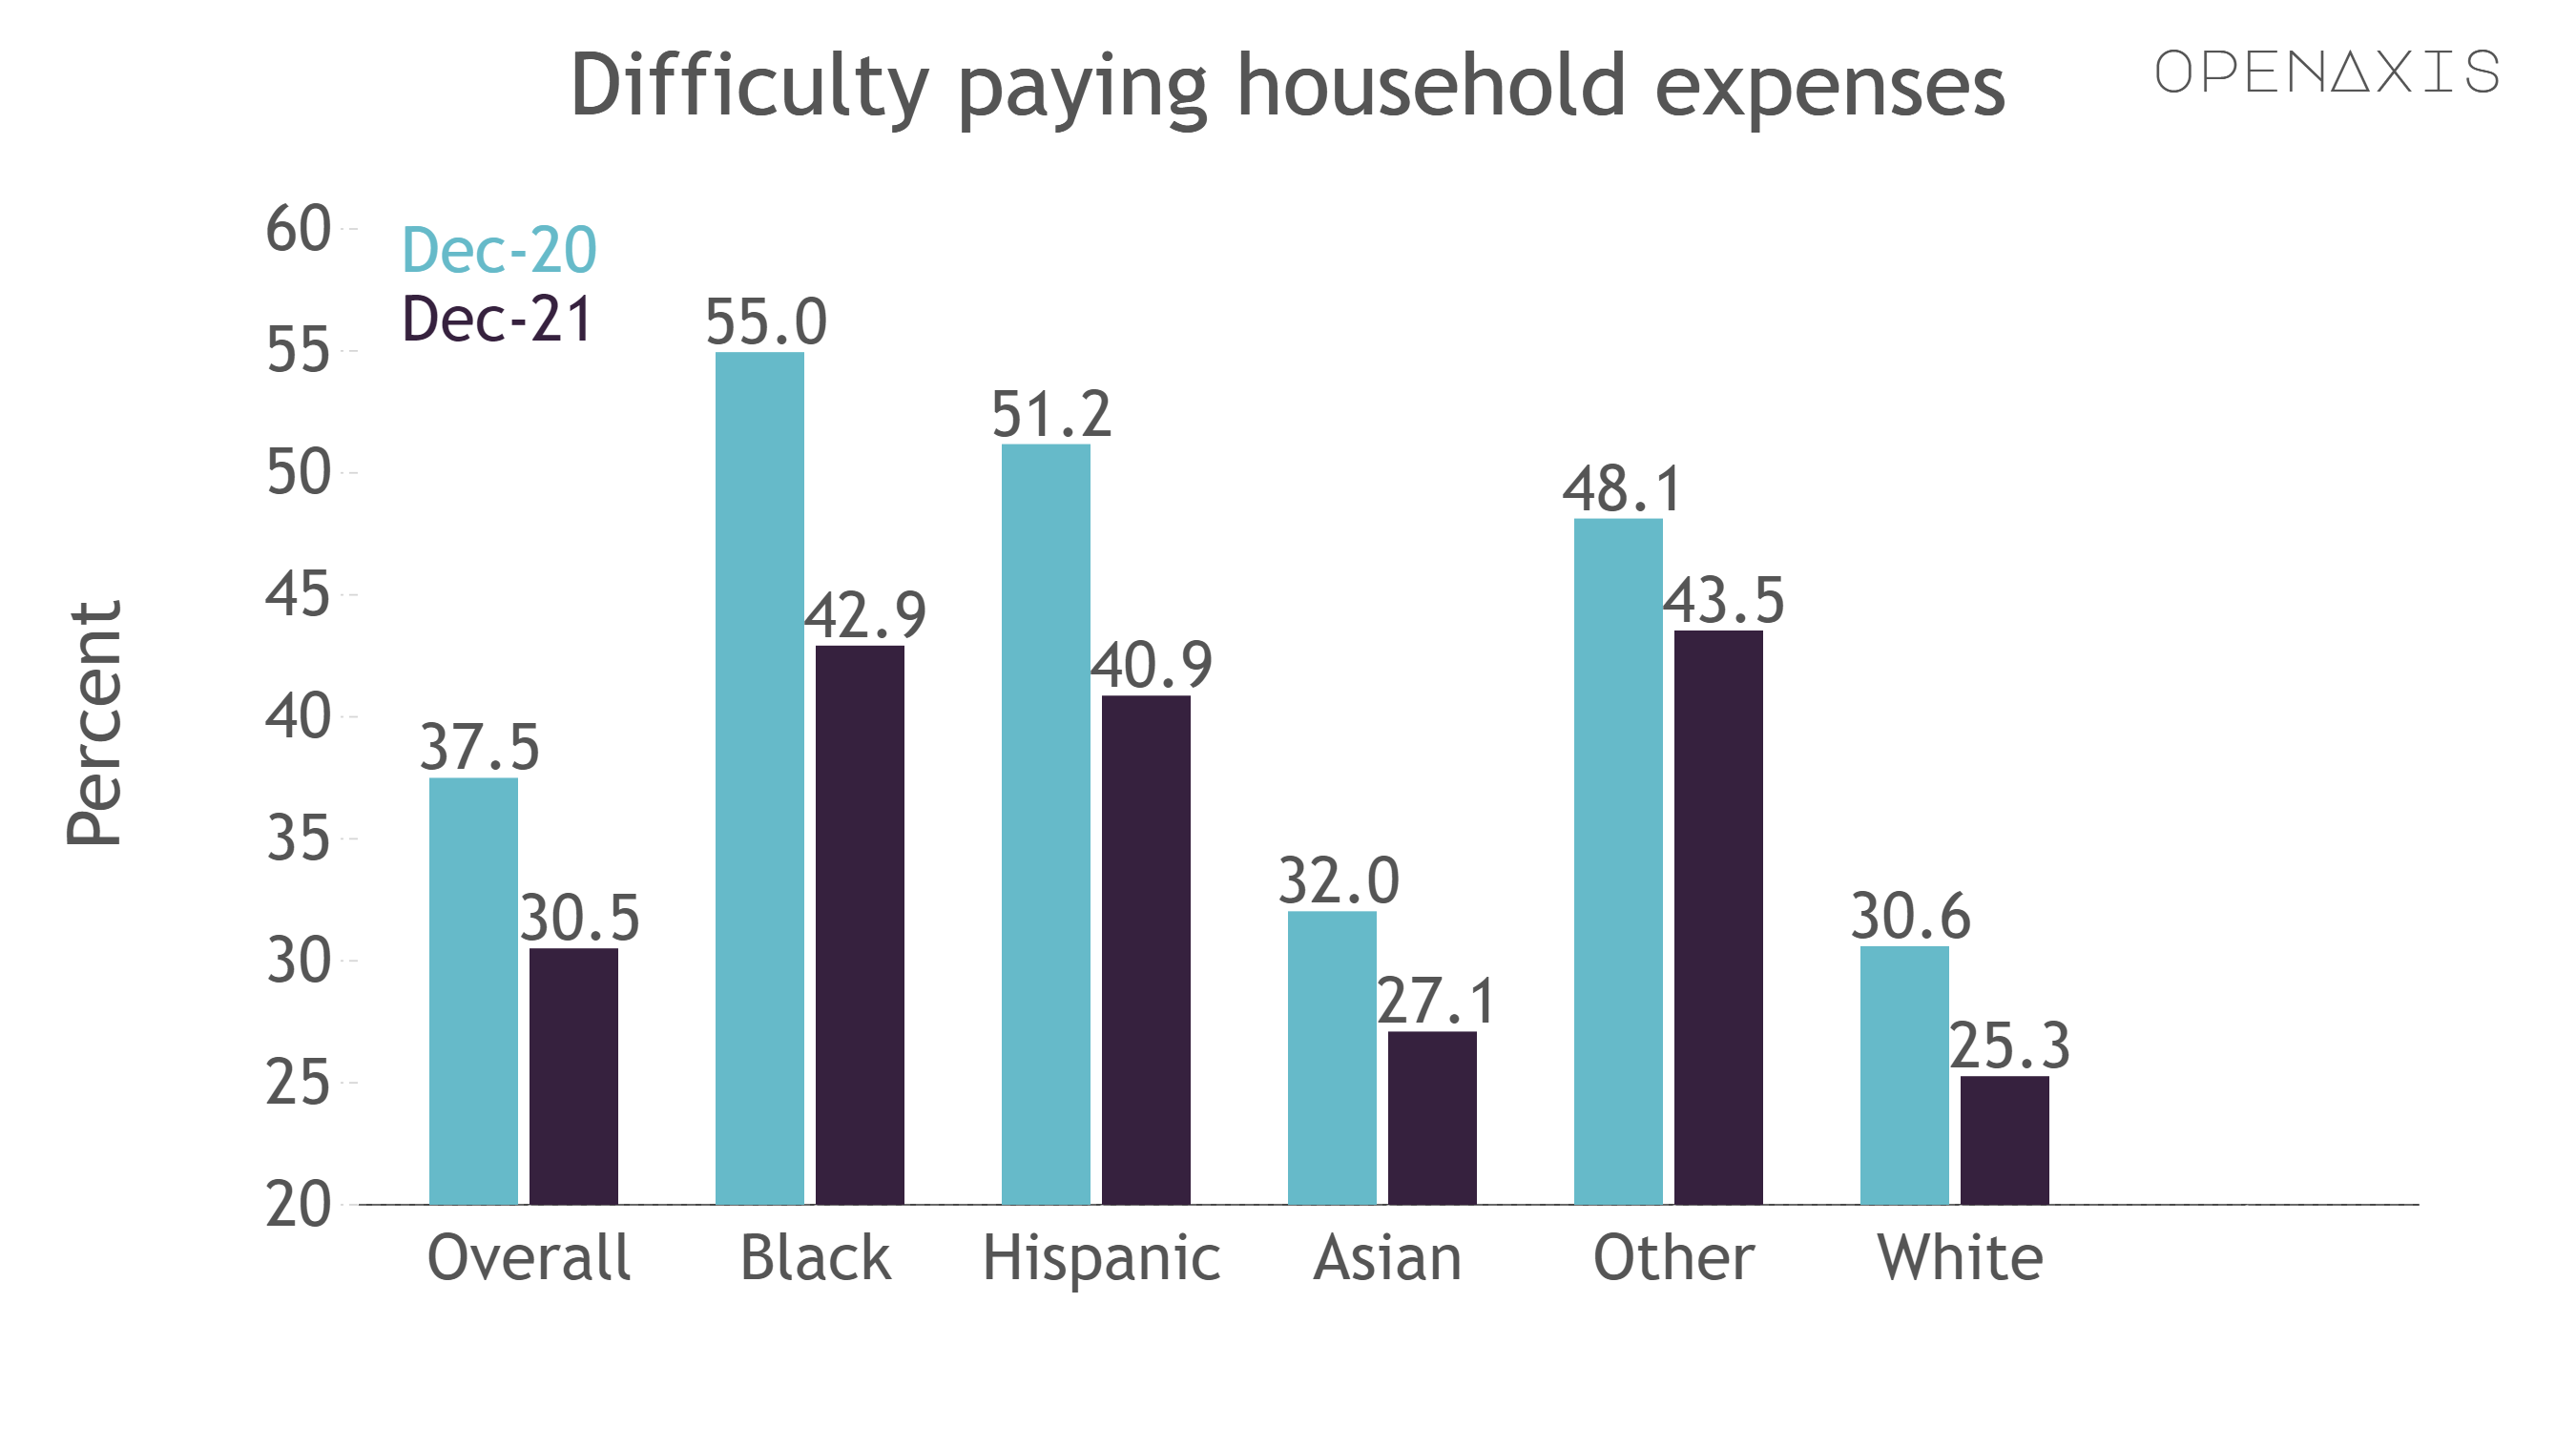 "Difficulty paying household expenses"